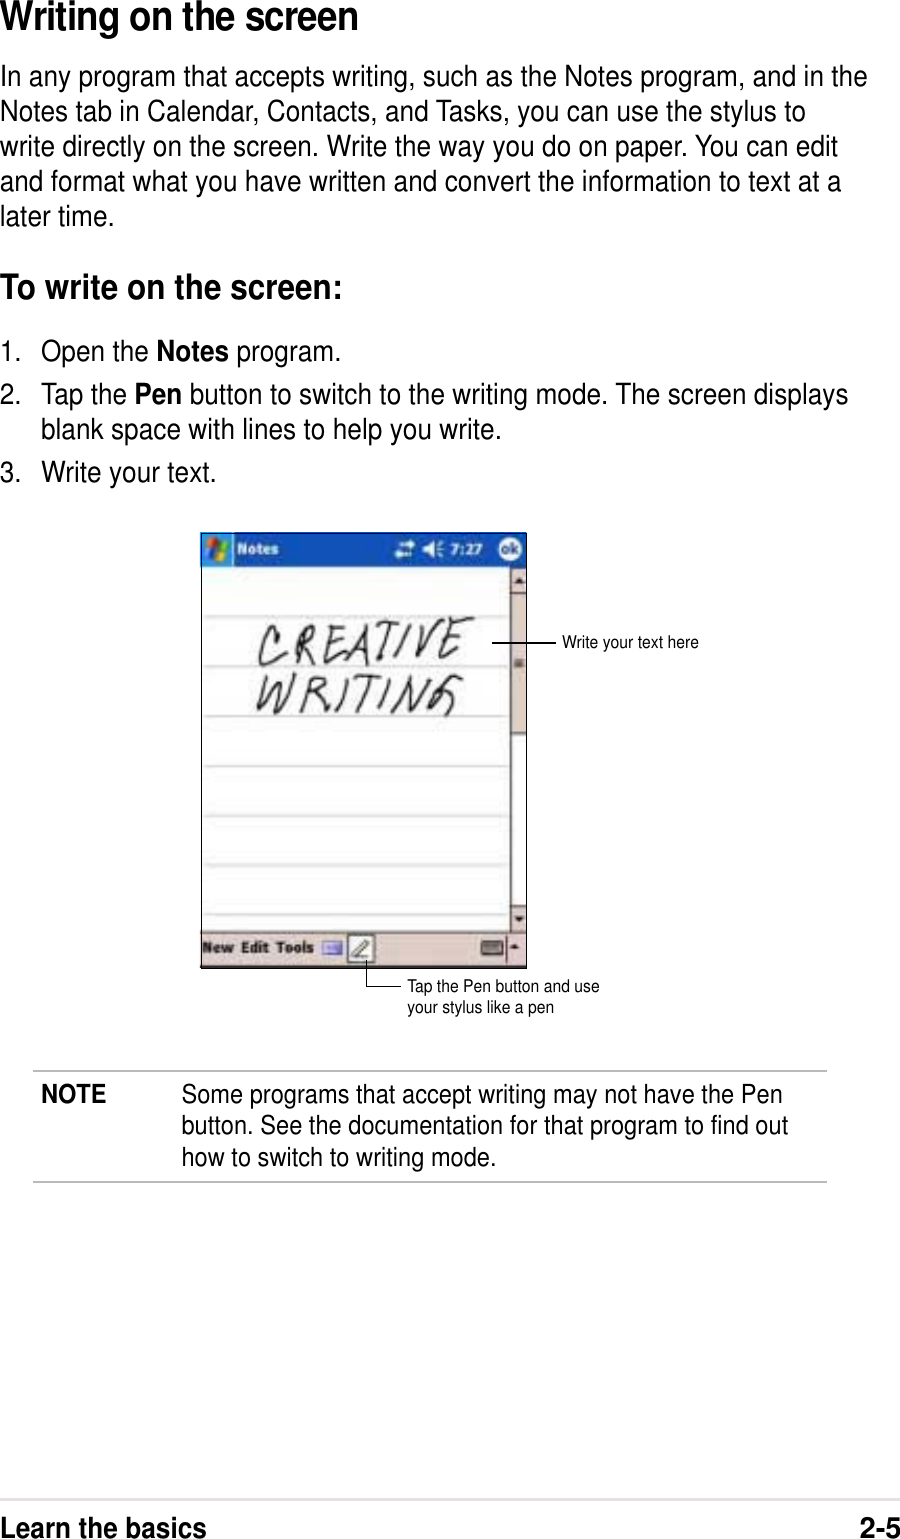 Learn the basics2-5Writing on the screenIn any program that accepts writing, such as the Notes program, and in theNotes tab in Calendar, Contacts, and Tasks, you can use the stylus towrite directly on the screen. Write the way you do on paper. You can editand format what you have written and convert the information to text at alater time.To write on the screen:1. Open the Notes program.2. Tap the Pen button to switch to the writing mode. The screen displaysblank space with lines to help you write.3. Write your text.NOTE Some programs that accept writing may not have the Penbutton. See the documentation for that program to find outhow to switch to writing mode.Tap the Pen button and useyour stylus like a penWrite your text here